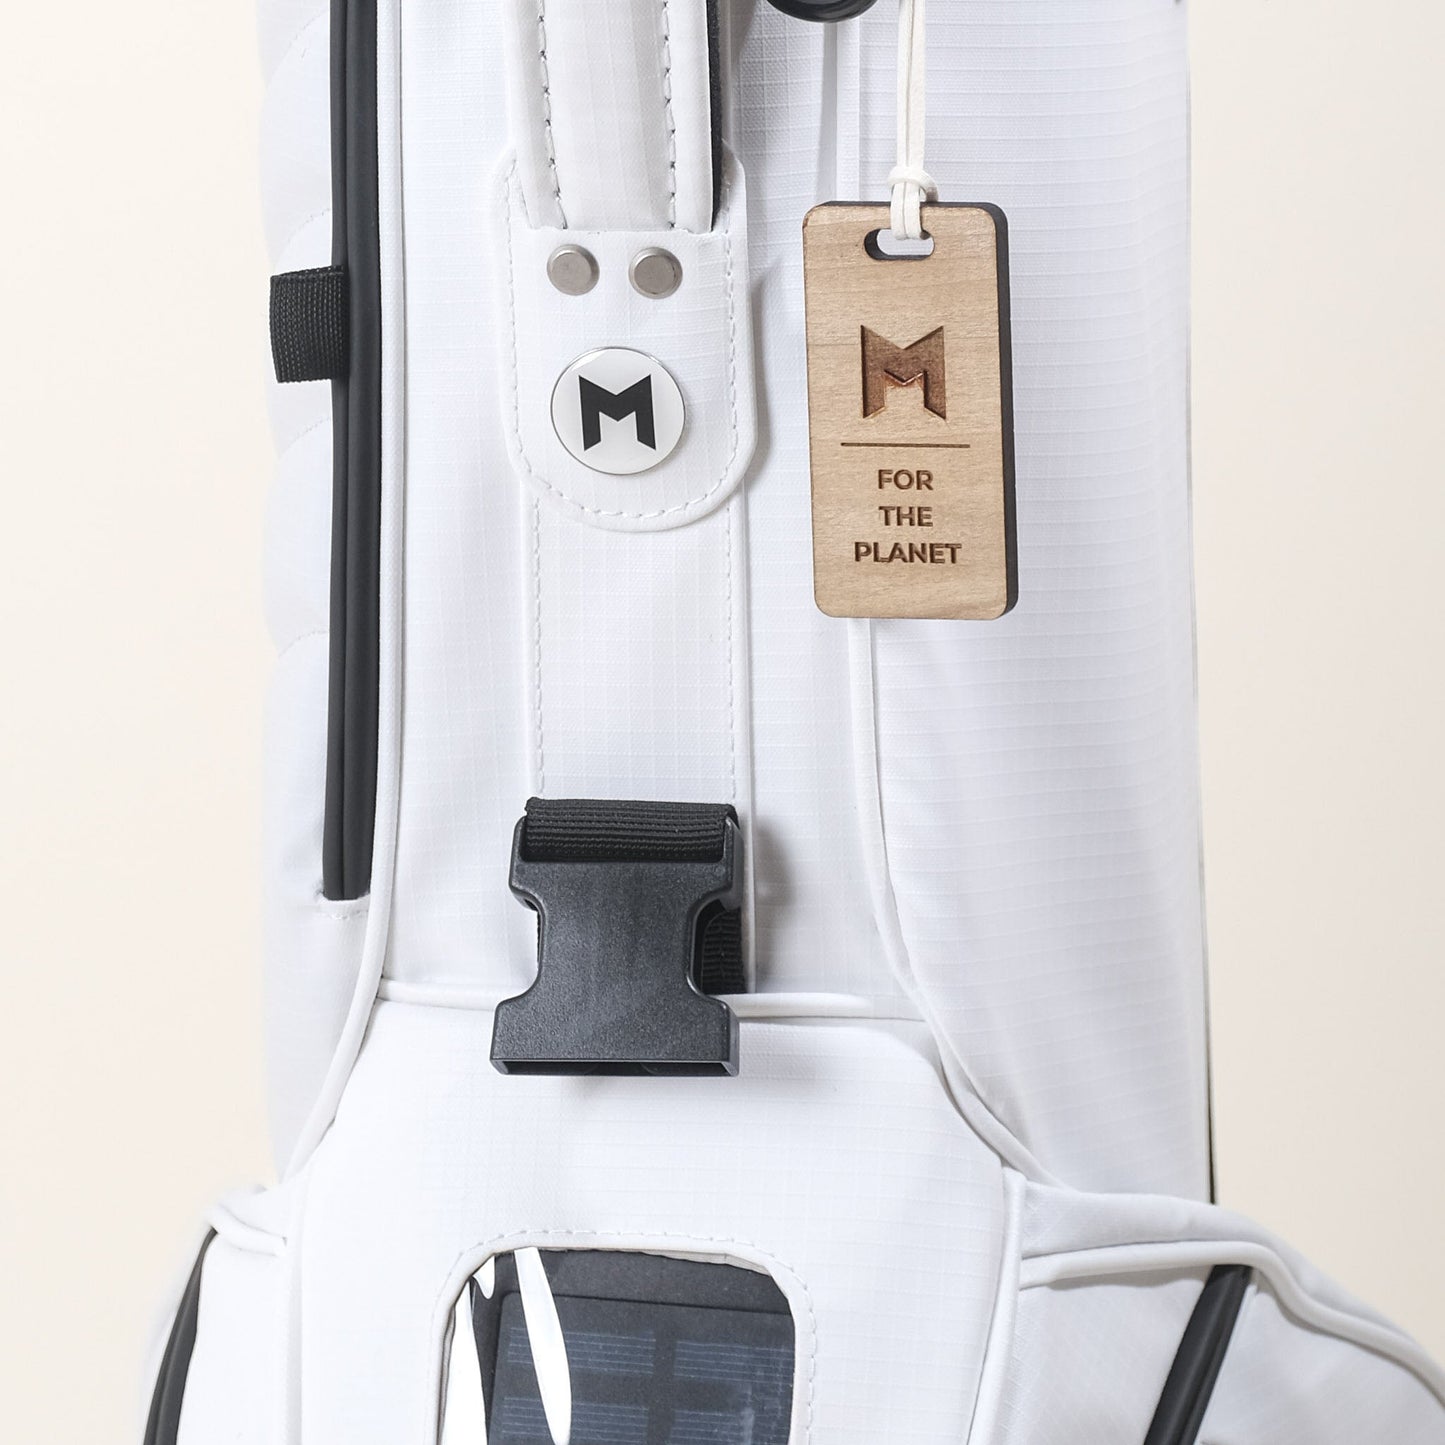 MNML GOLF's new MR1 golf bag is made from 100% recycled ripstop and has a 5-way divider.